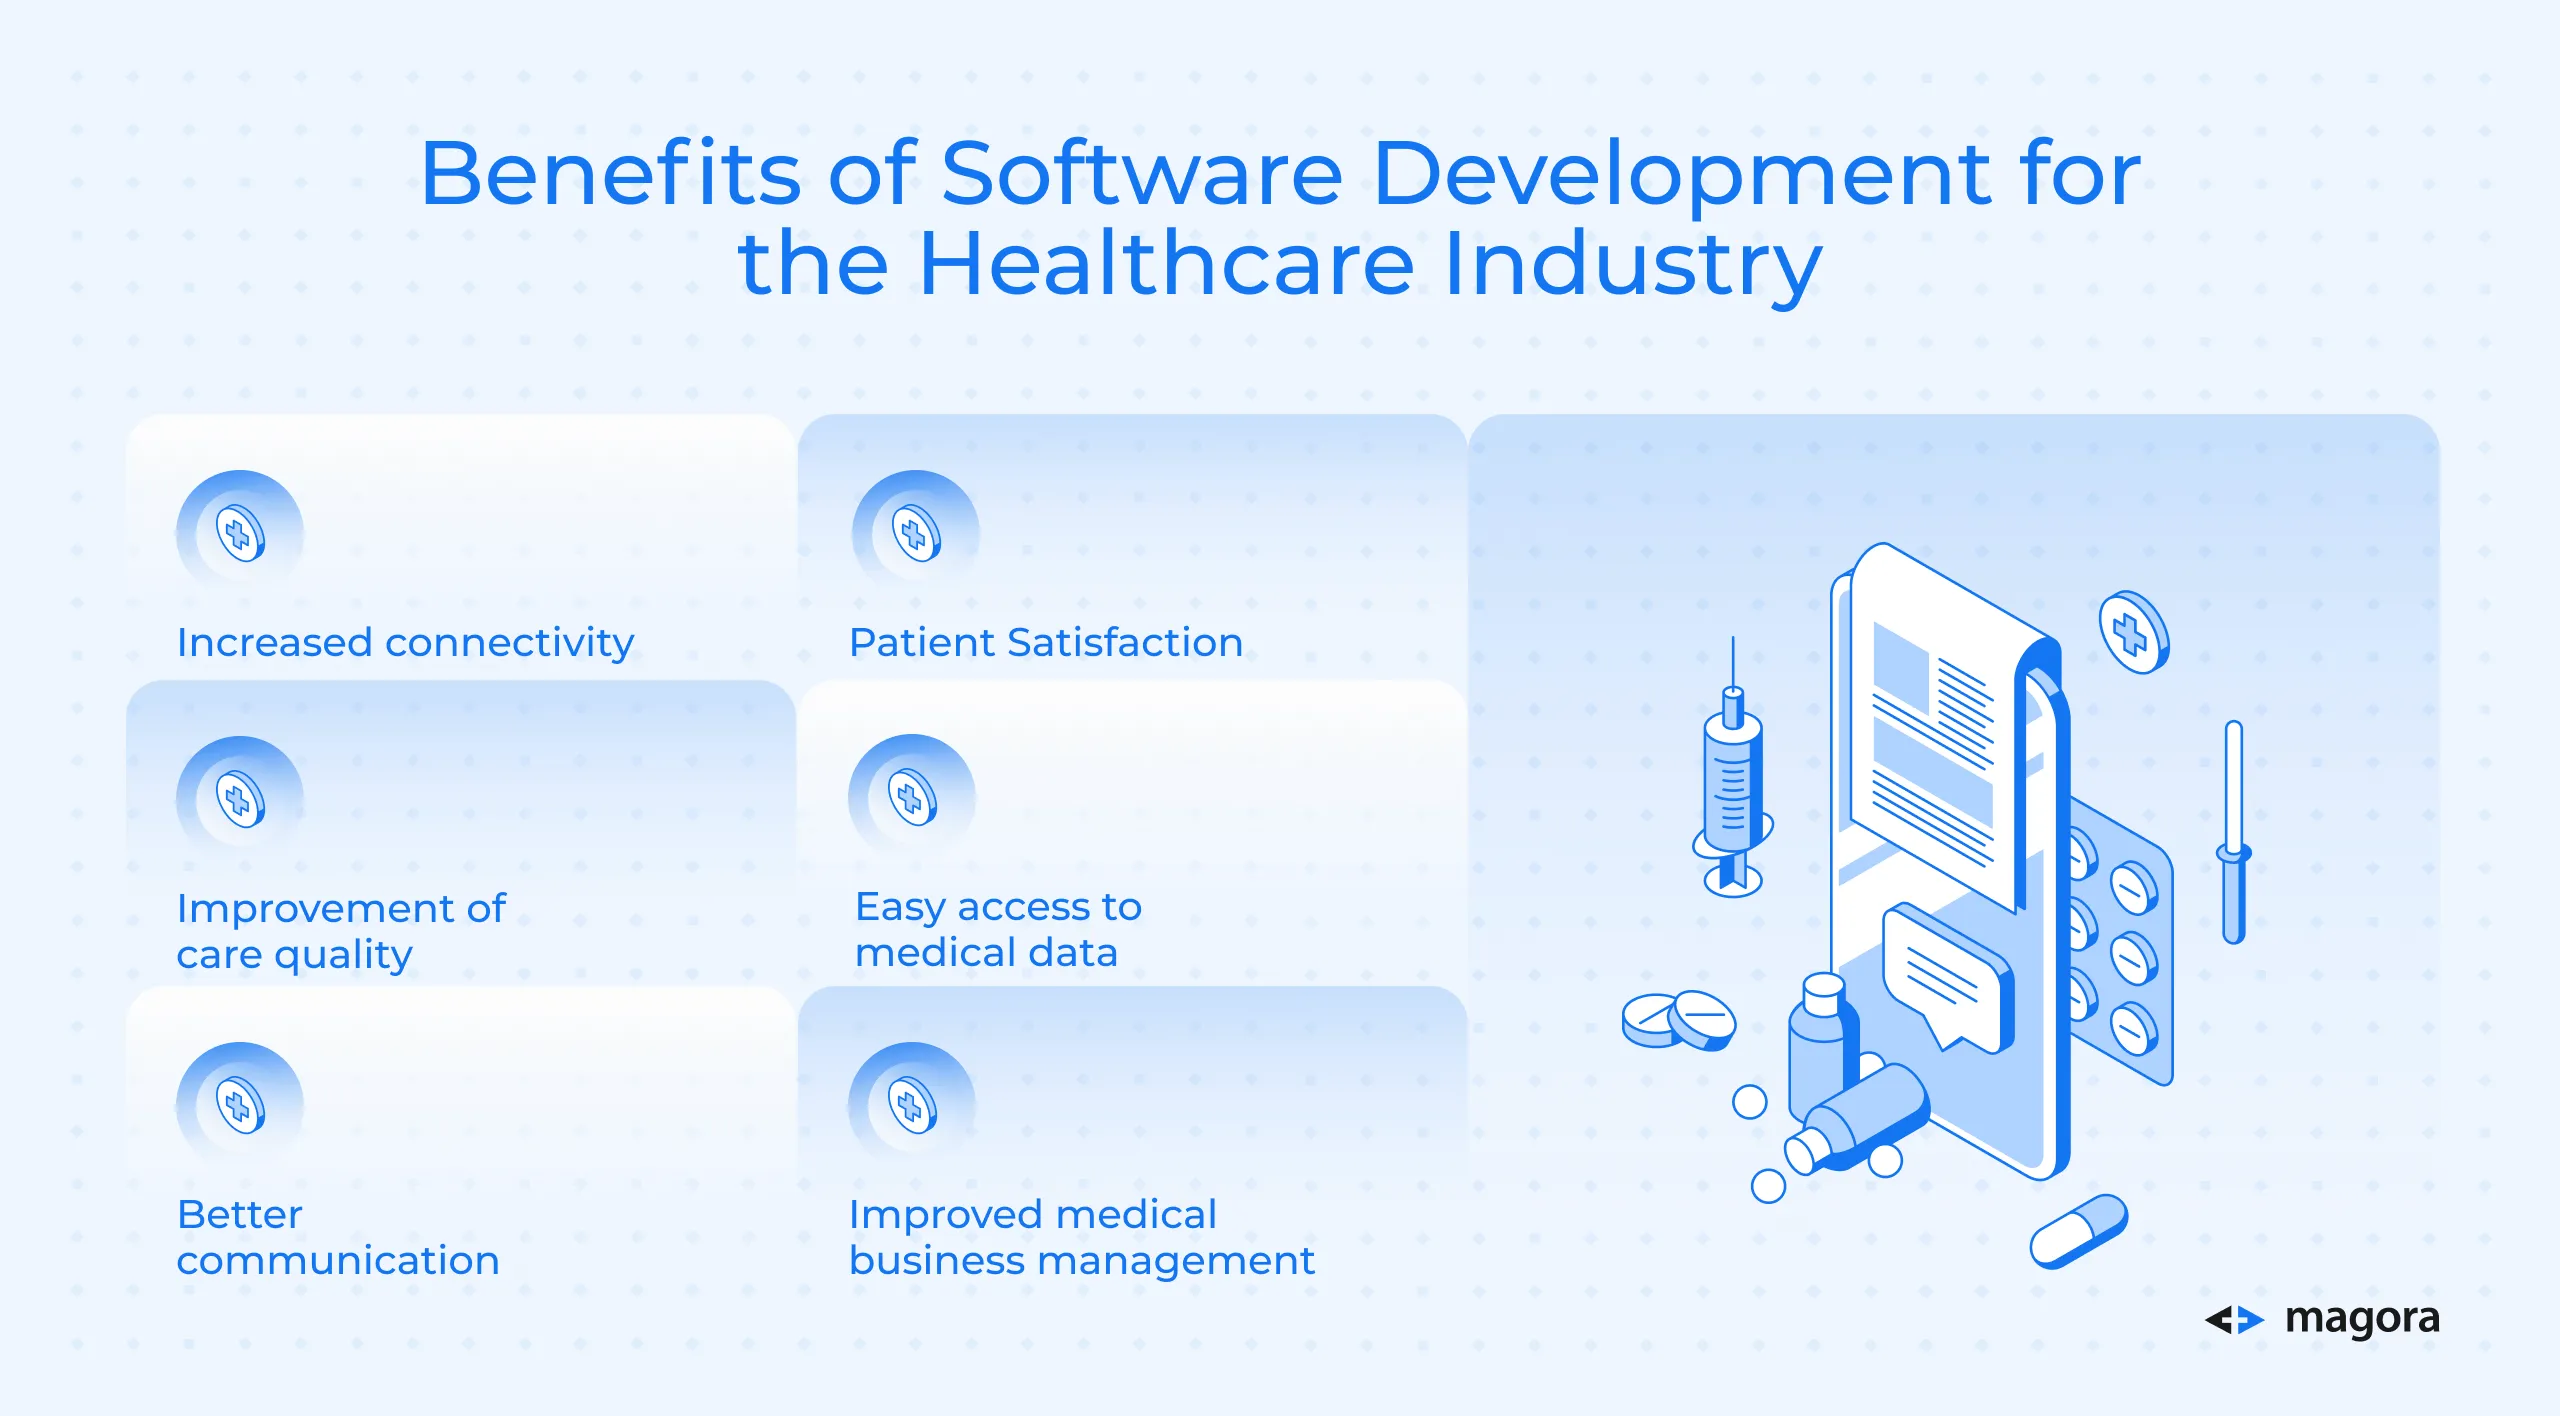 Benefits of Software Development for the Healthcare Industry